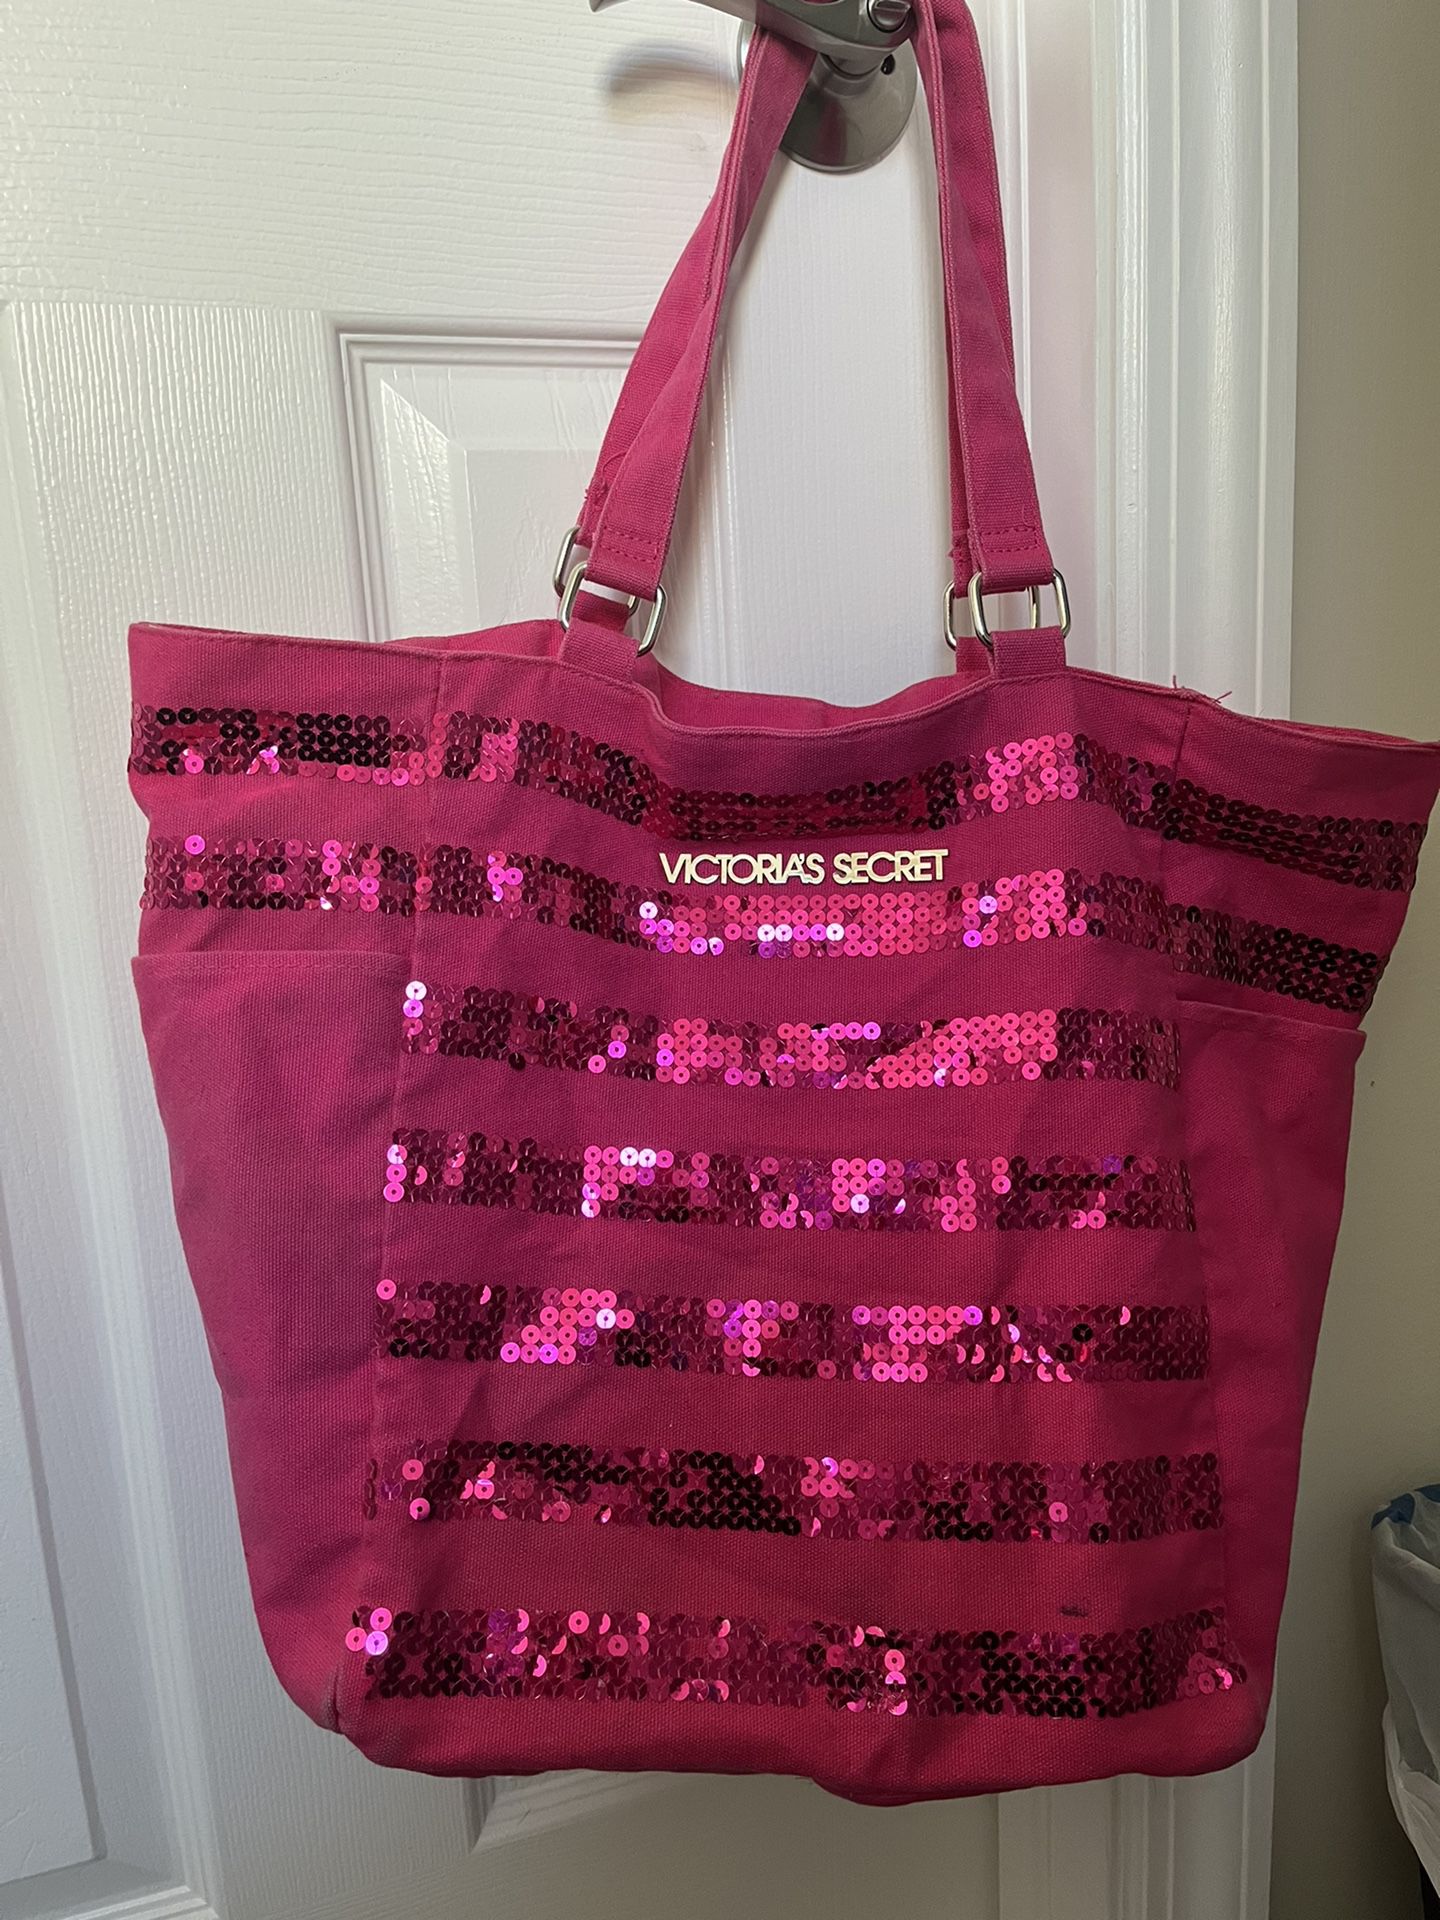 Victoria's Secret tote bag for Sale in Commack, NY - OfferUp